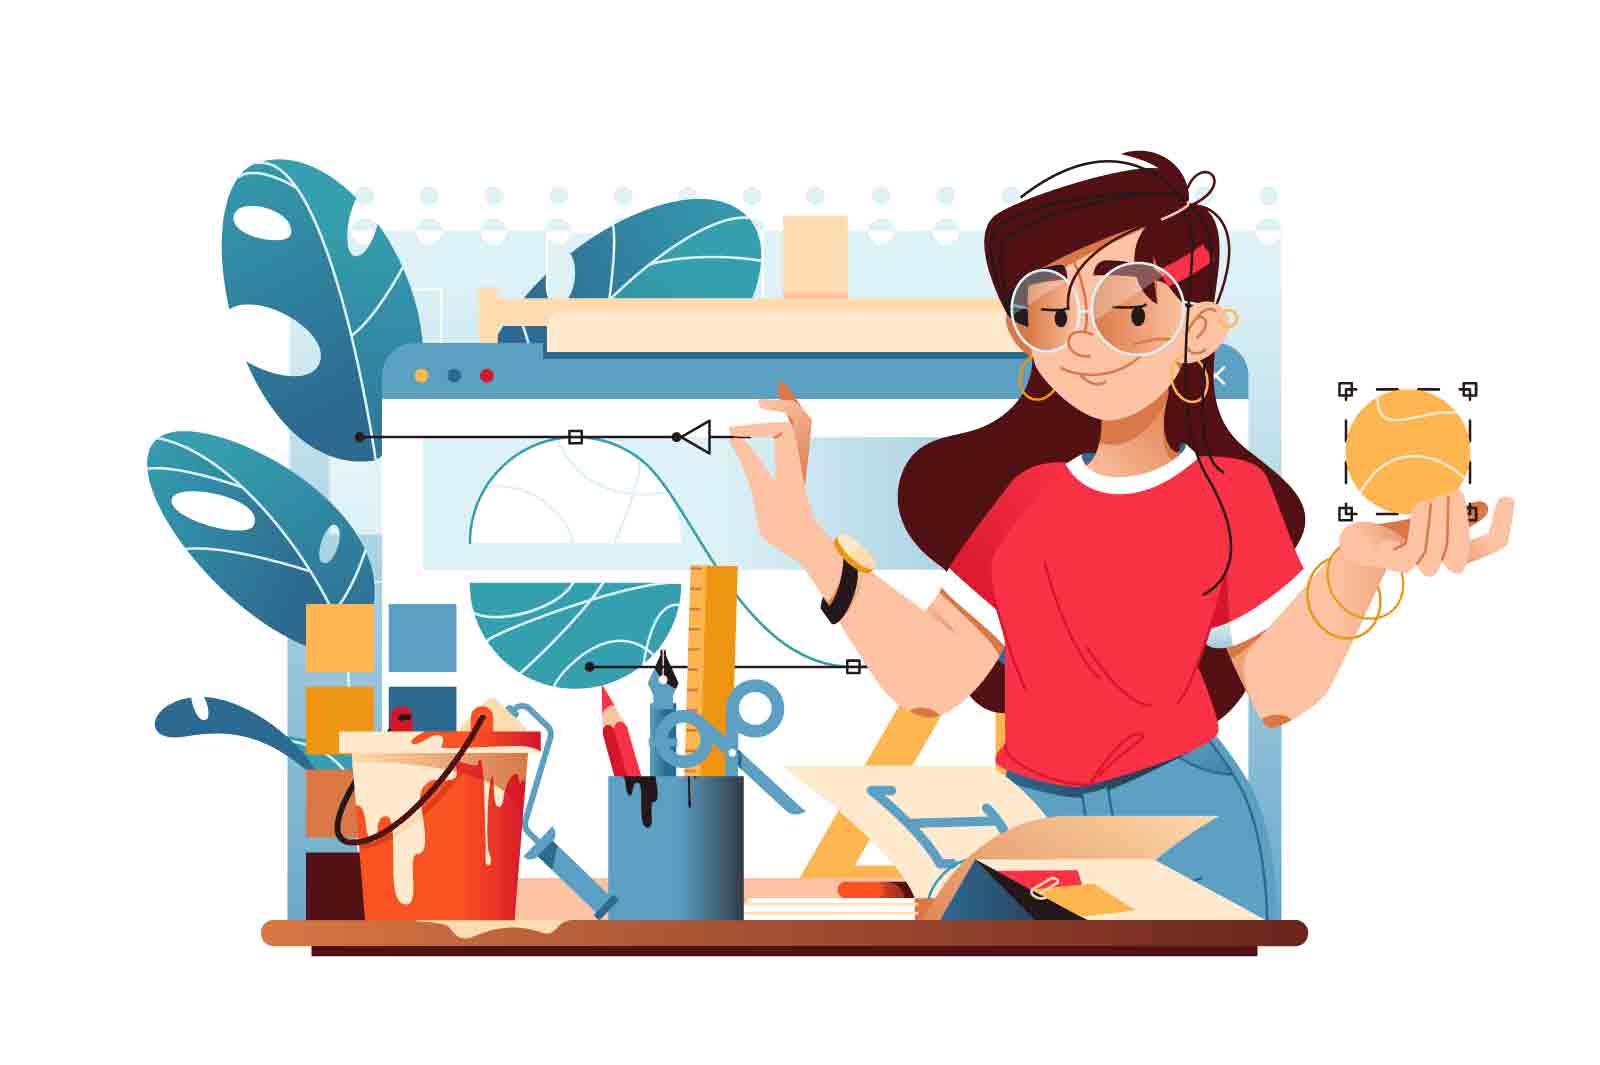 Girl holds drawing tools, standing near painting supplies, vector illustration. Graphic drawing concept.